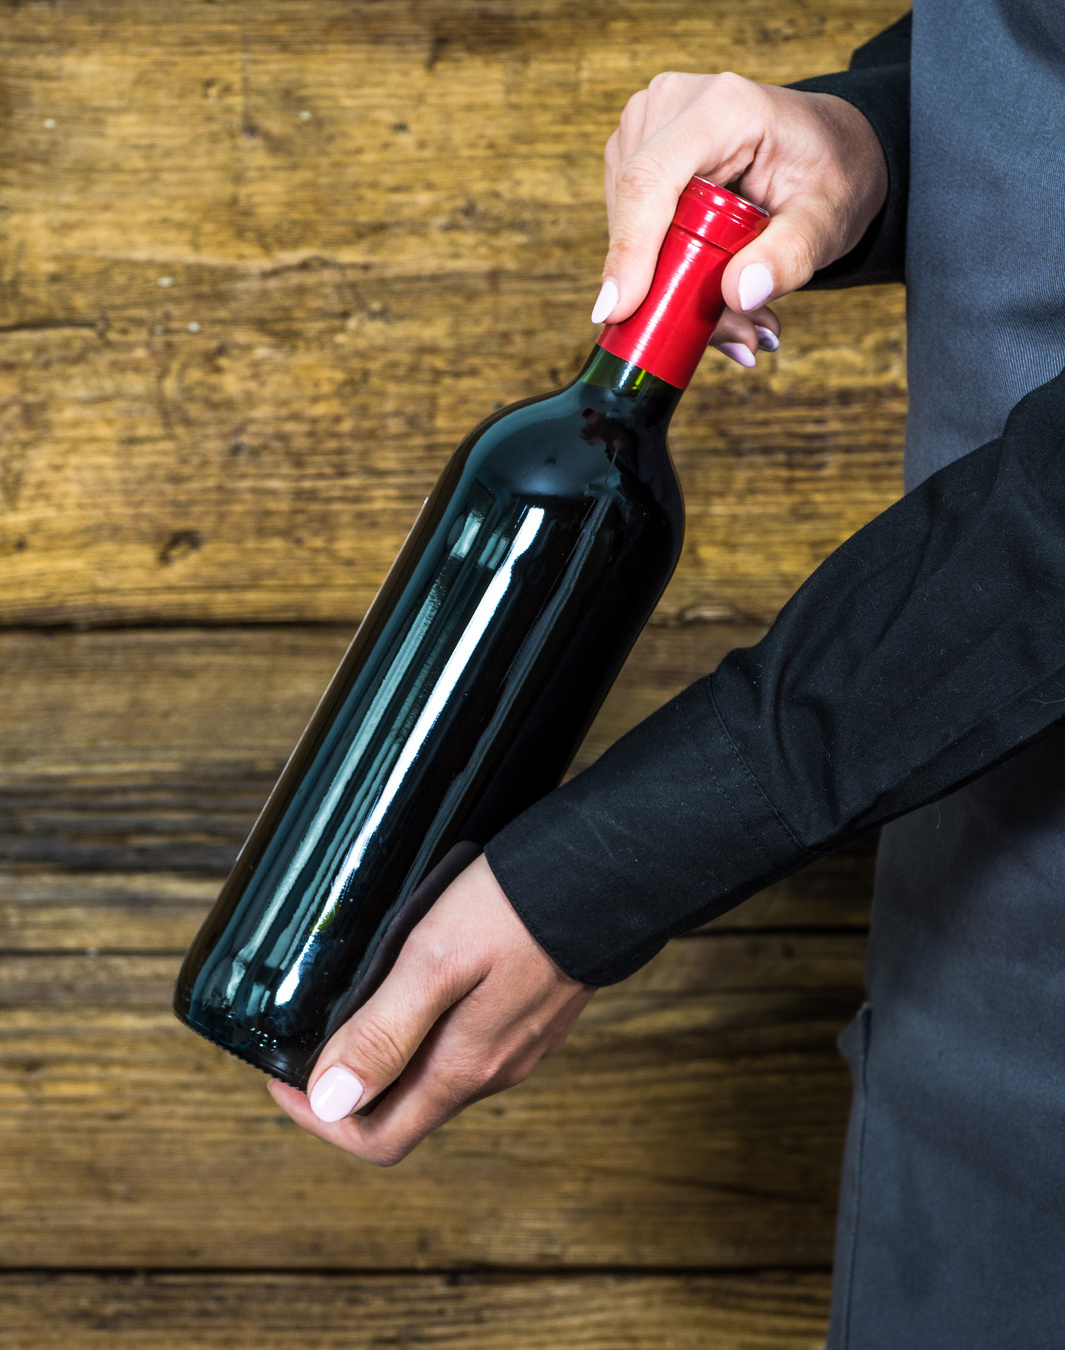 waitress showing red wine bottle to restaurants clients